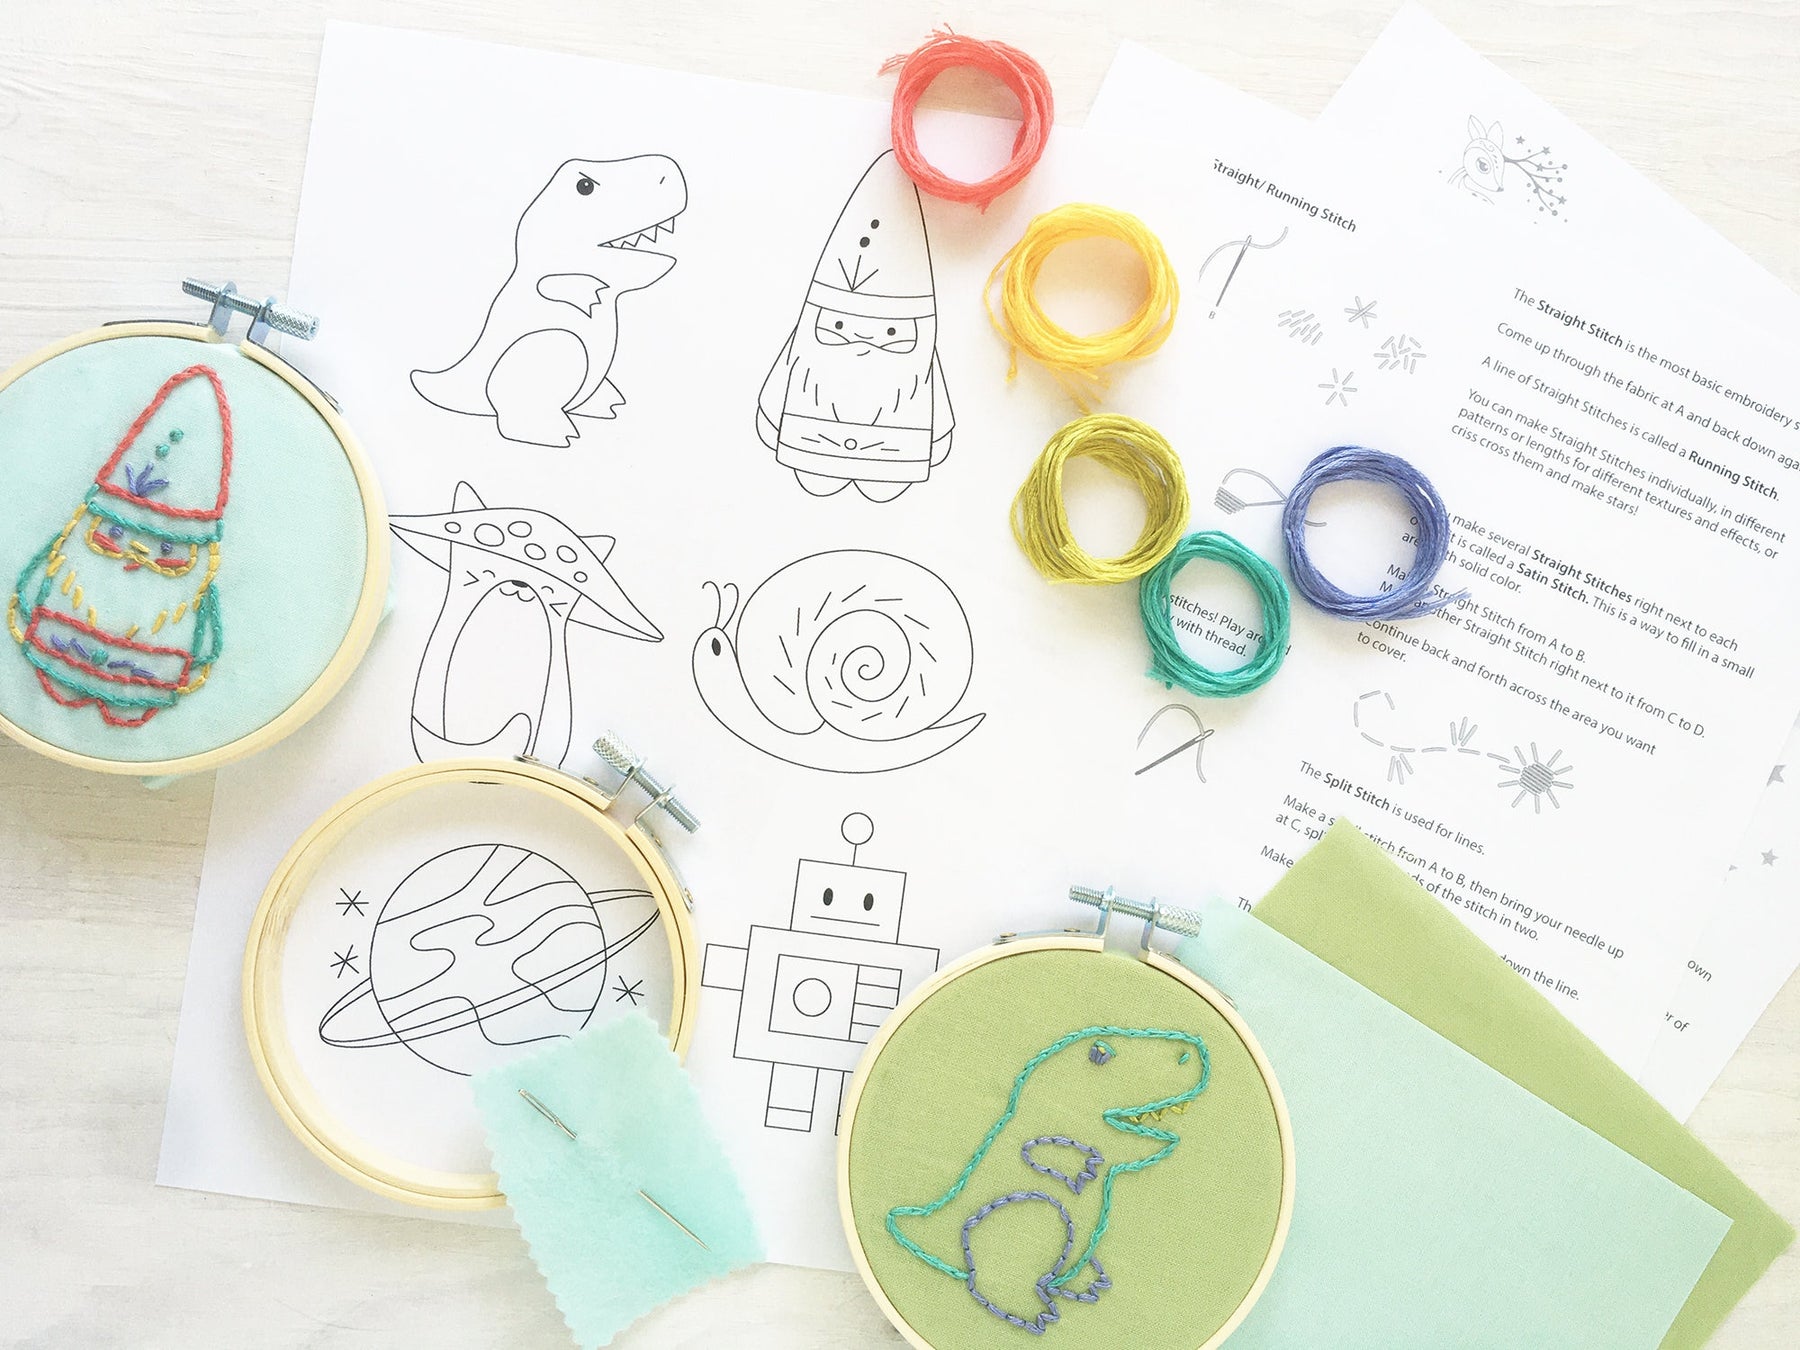 Hand Sewing Kit For Kids - Learn Basic Stitches - Alder & Alouette